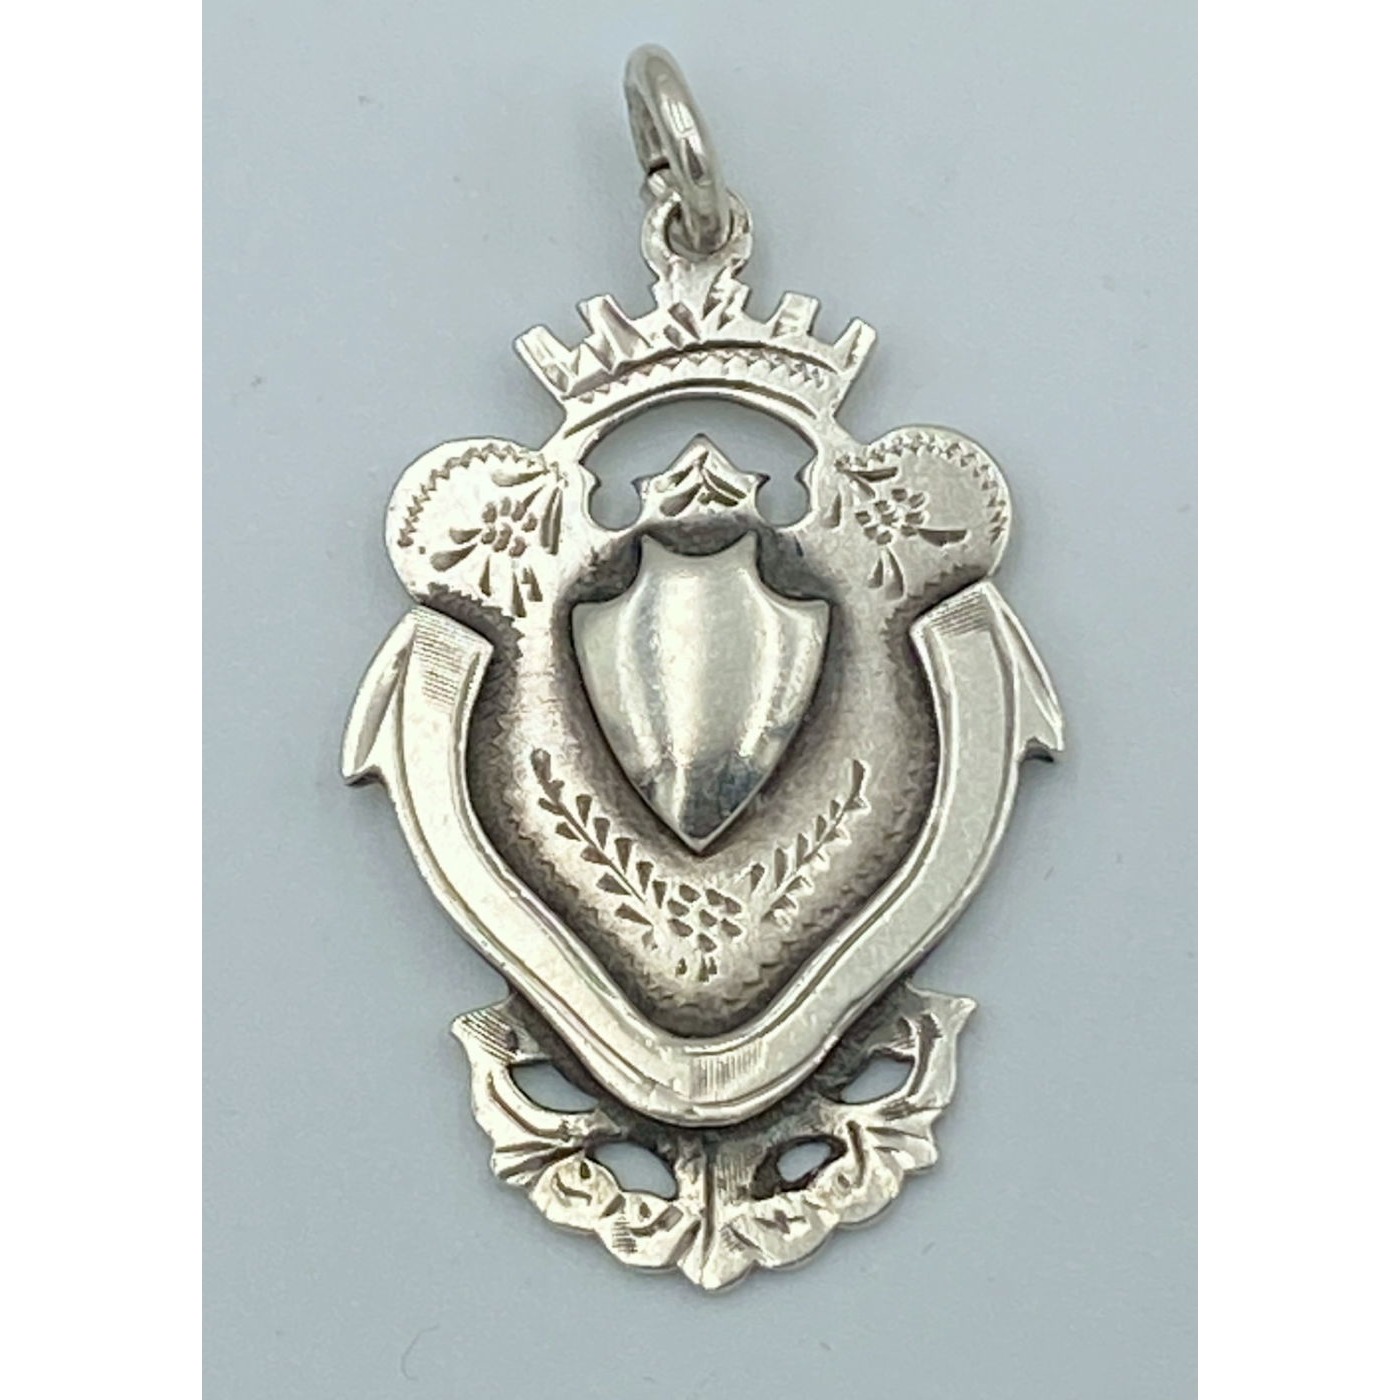 Superb English Sterling Silver Medal w/ Crown Top